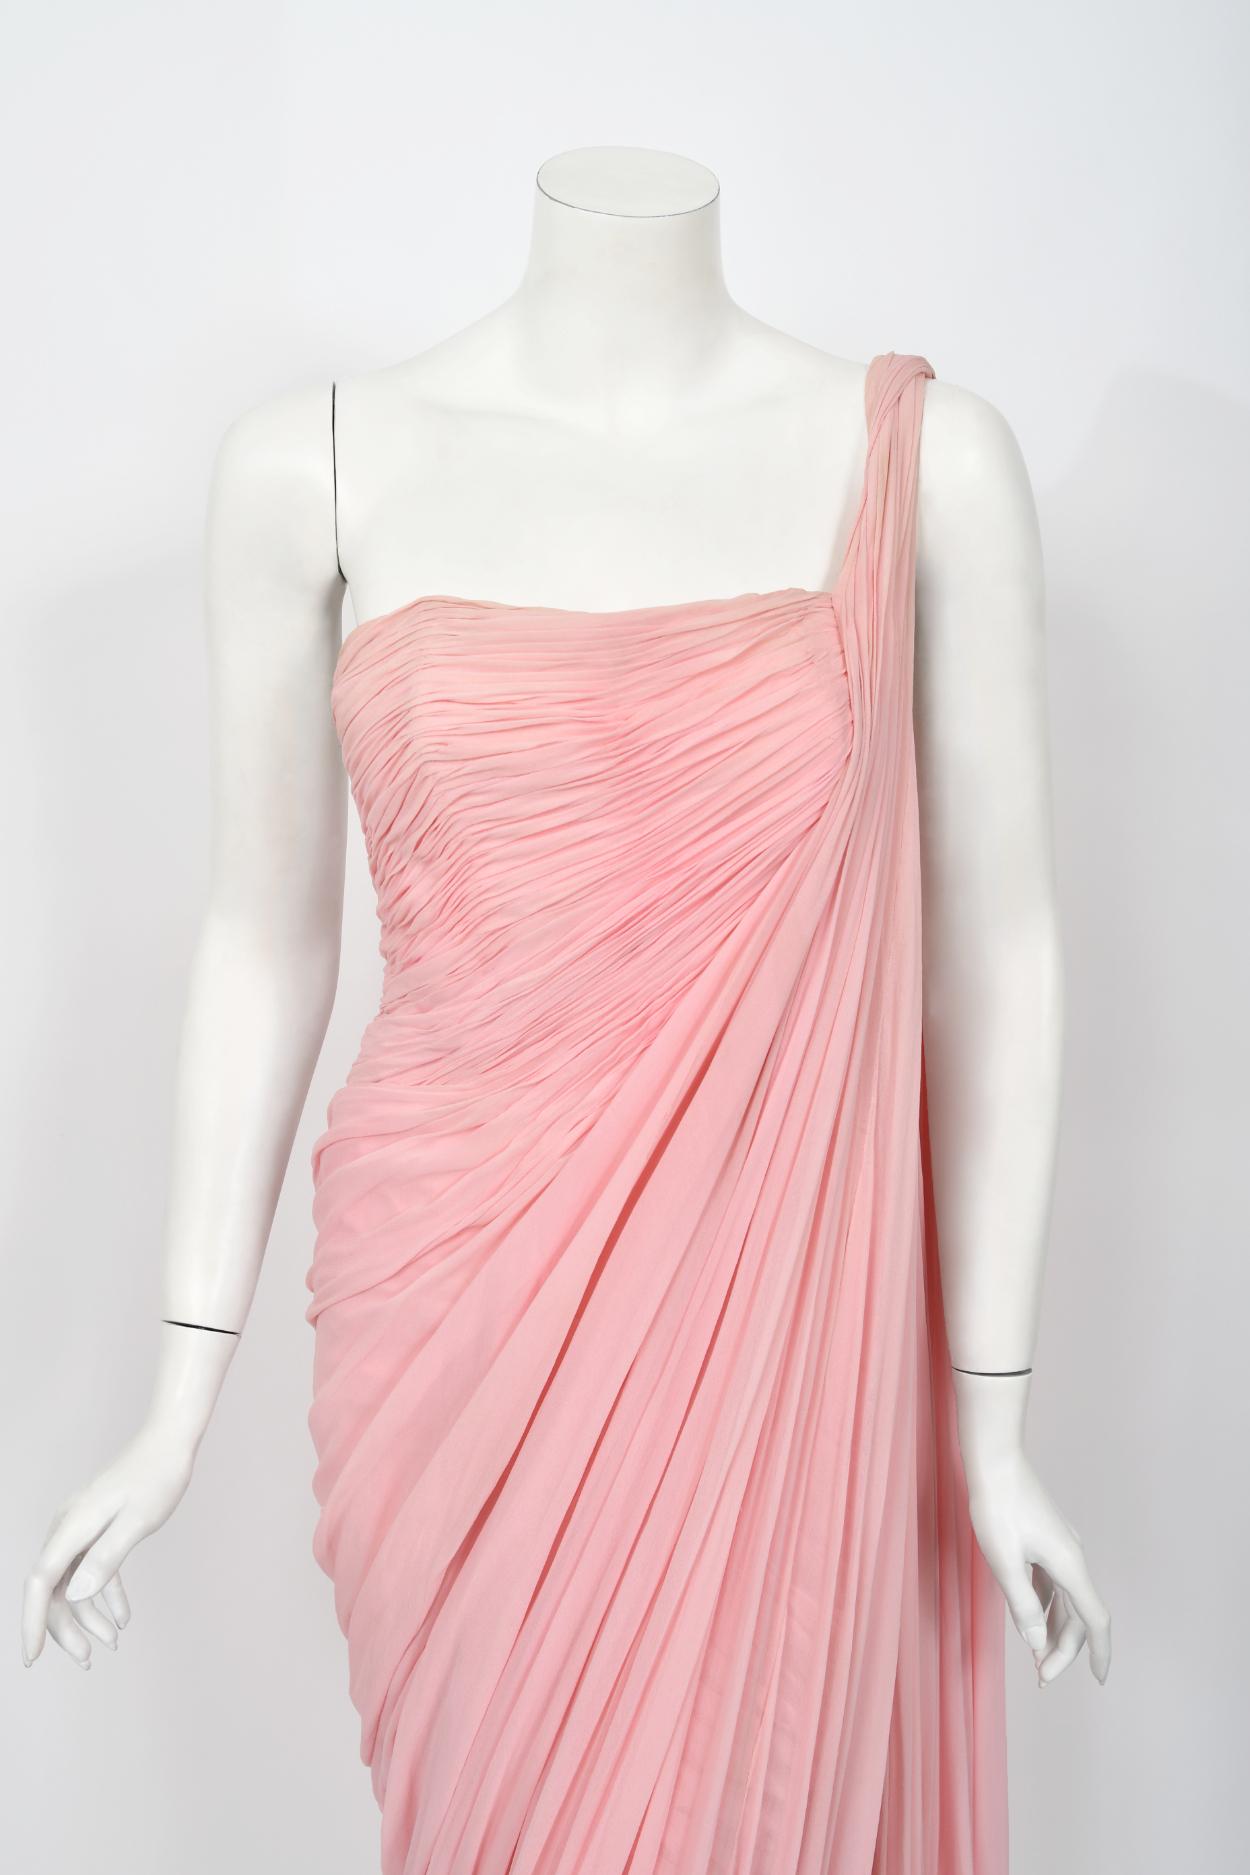 1958 Jean Dessès Haute Couture Documented Pink Ruched Silk Chiffon Goddess Gown For Sale 4